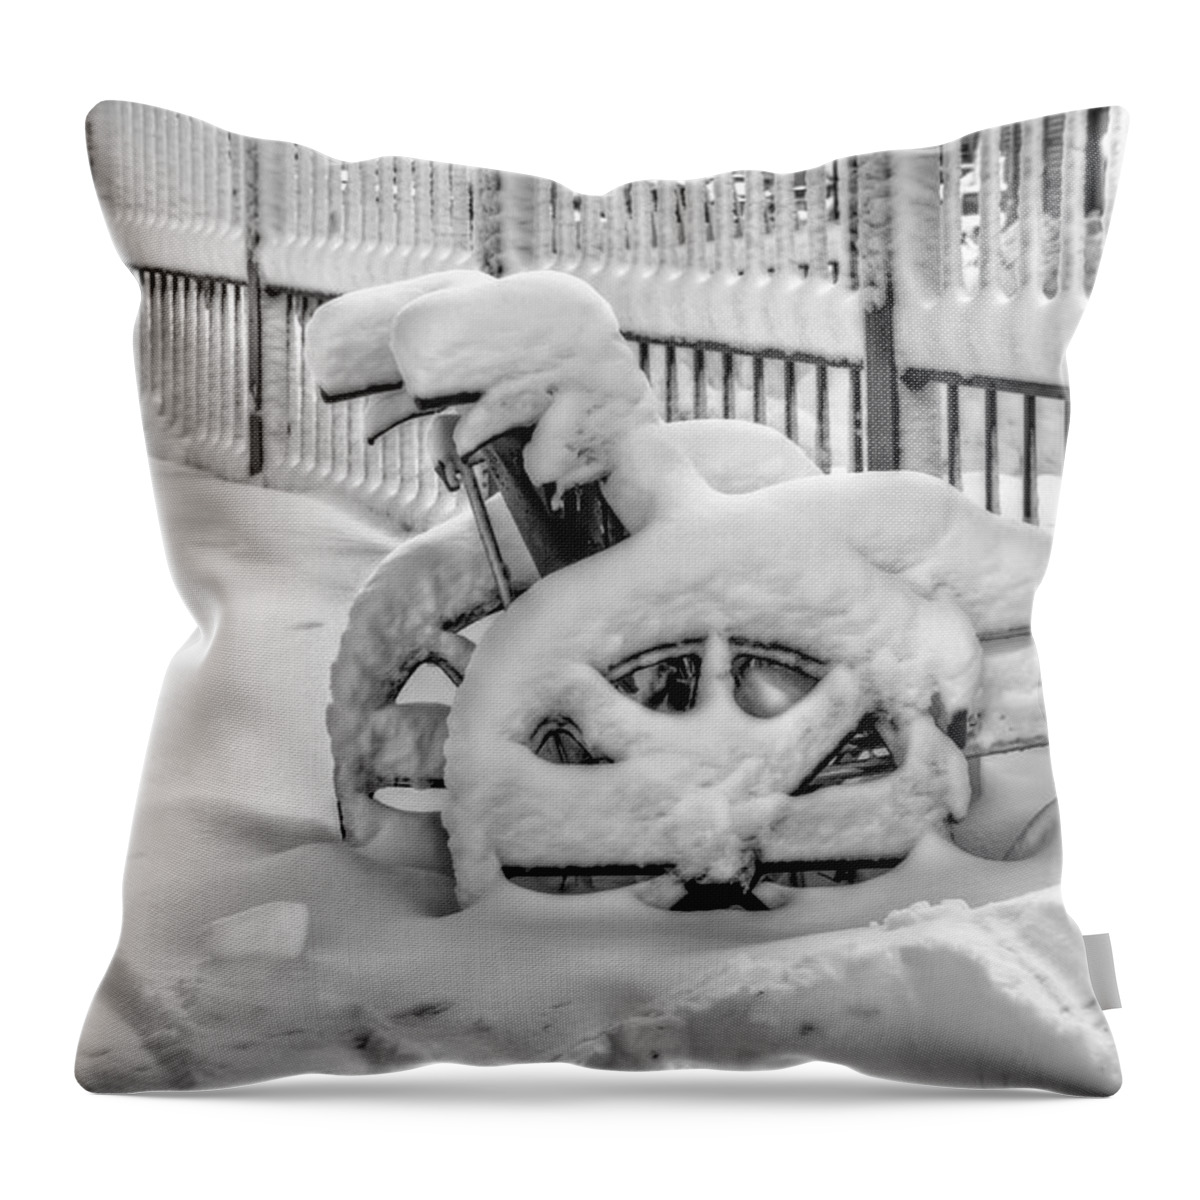 Snow Throw Pillow featuring the photograph Cold Disposition by Evelina Kremsdorf